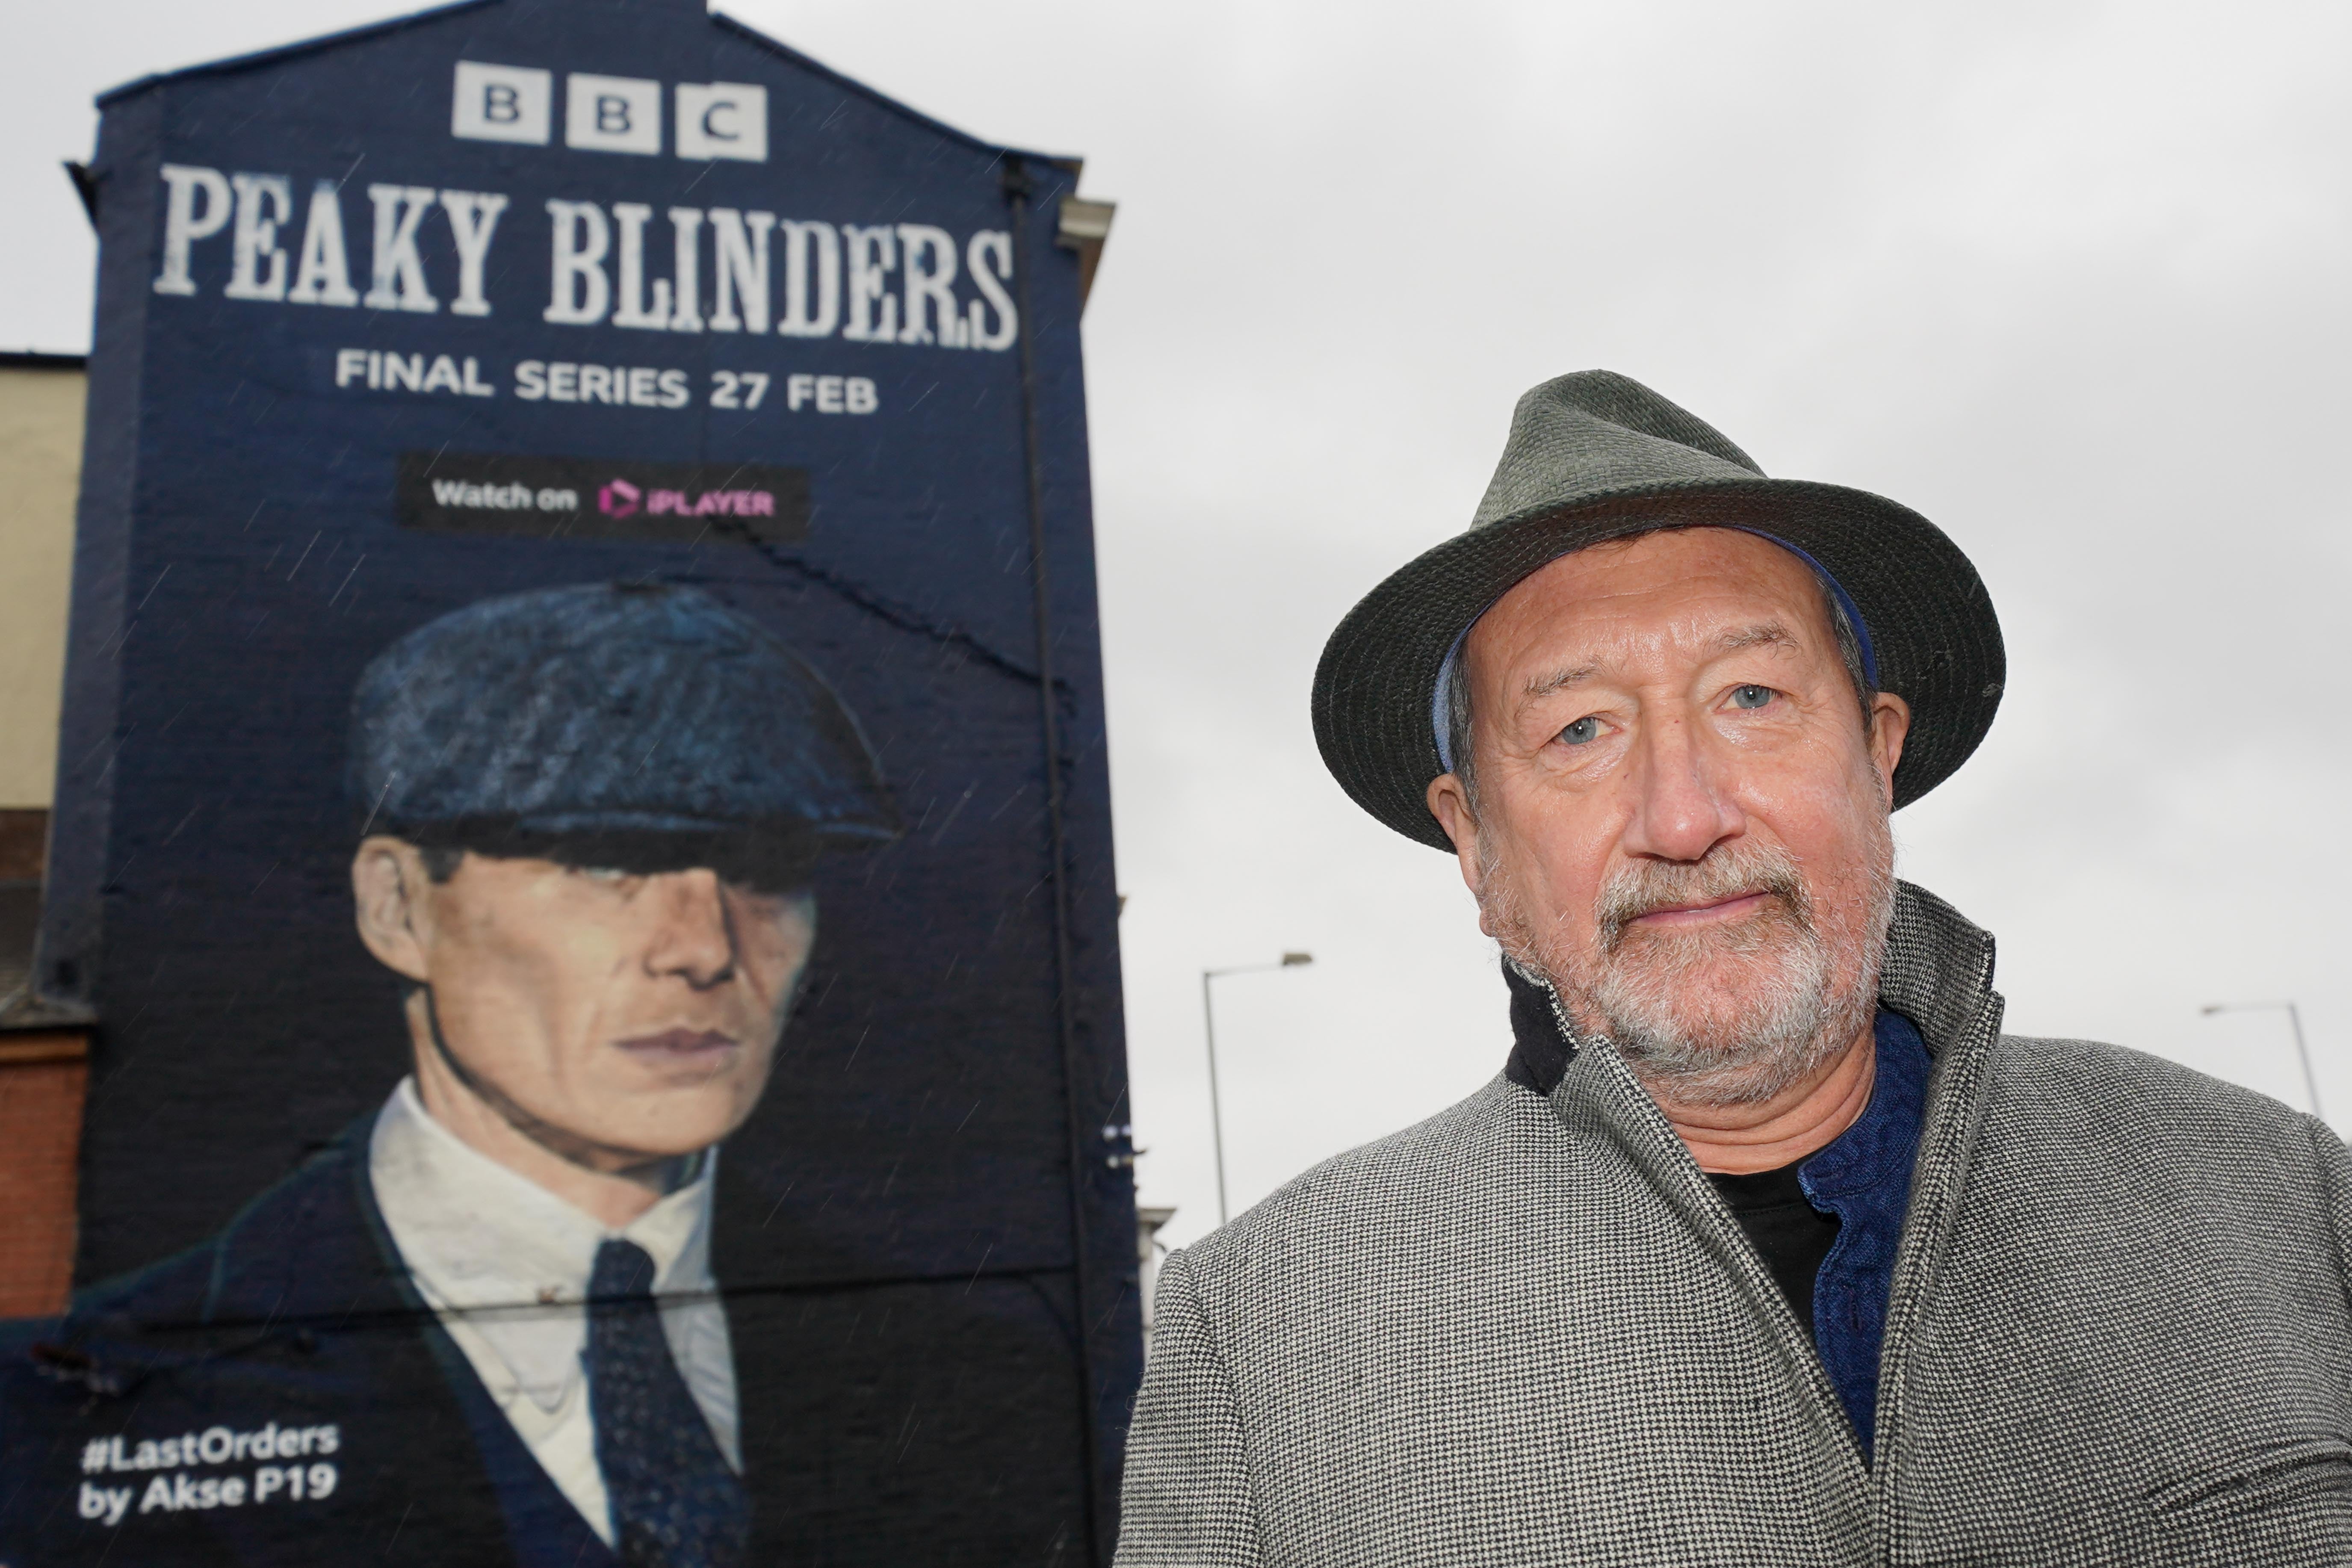 Peaky Blinders creator Steven Knight at the unveiling of a mural by artist Akse P19 of actor Cillian Murphy as Peaky Blinders crime boss Tommy Shelby, in the historic Deritend area of Birmingham (Jacob King/PA)